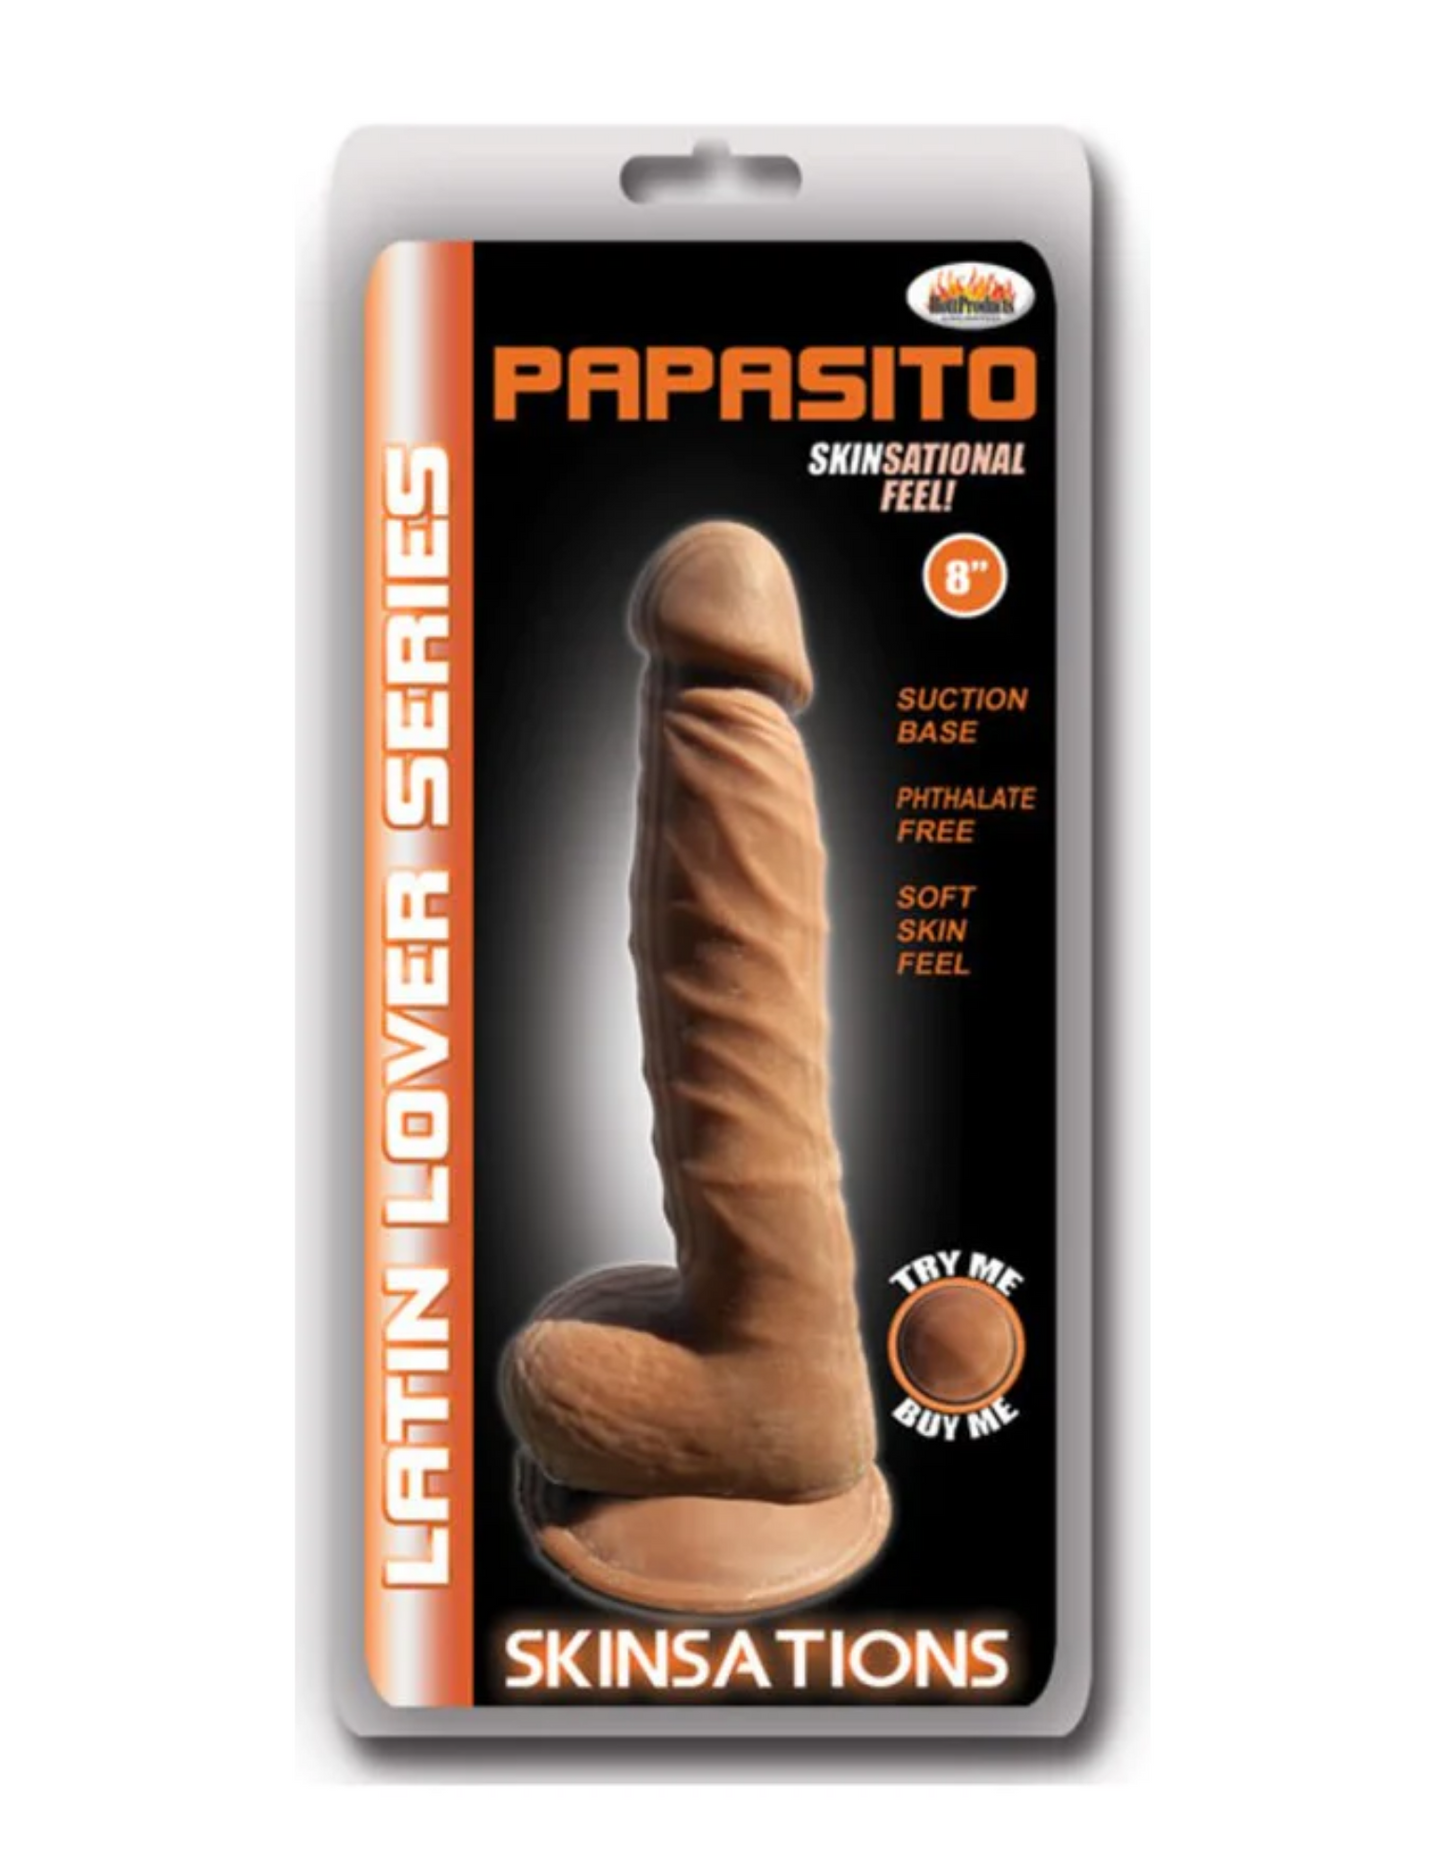 Photo of the product and package for the kinsations Papasito Dildo from Hott Products.